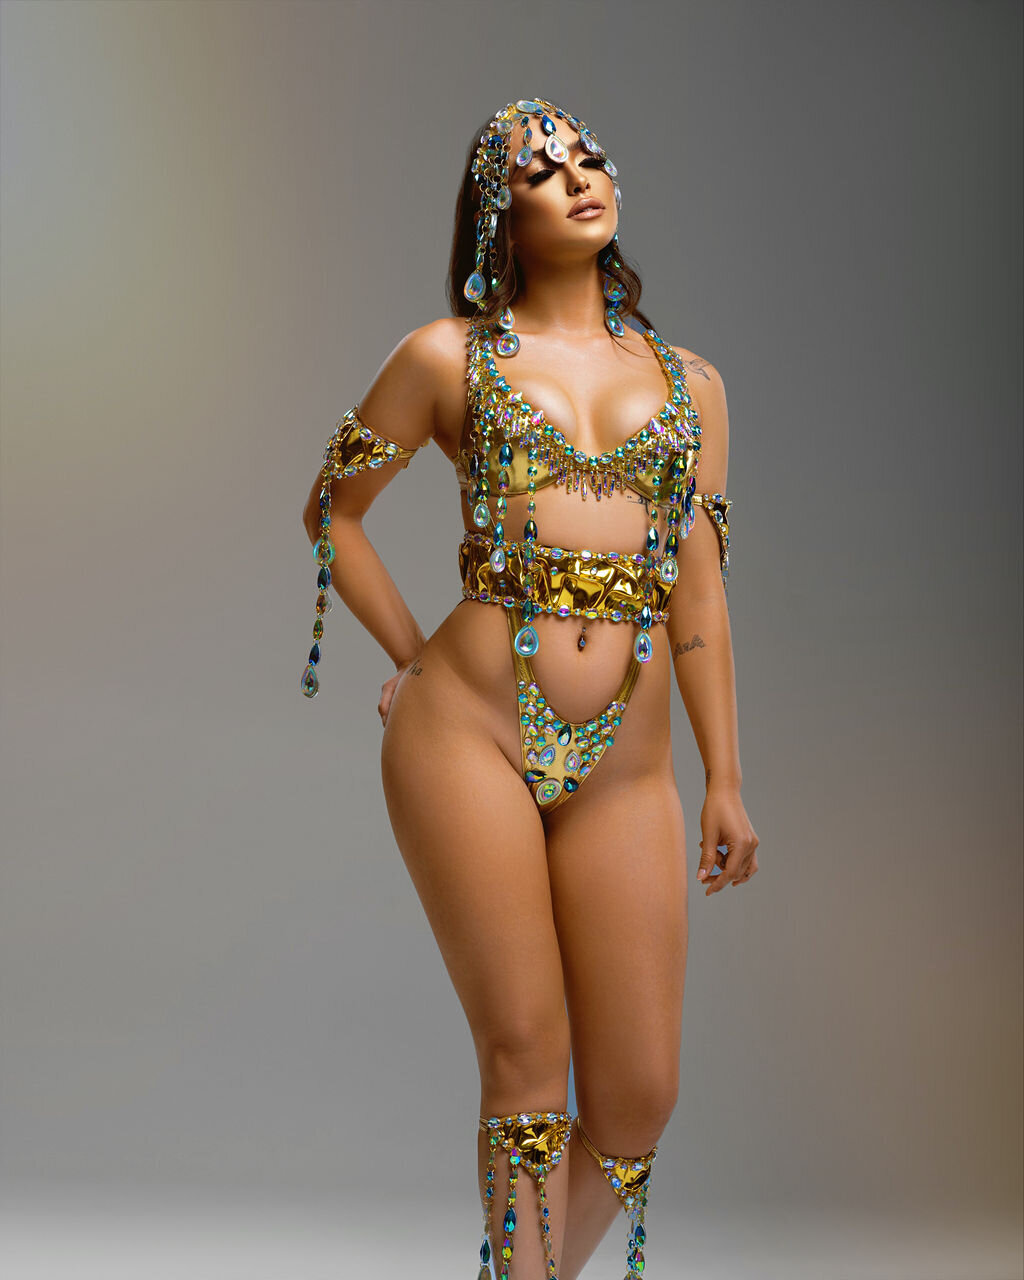 Gold costume for Caribana Toronto. Register to play mas with Sunlime Mas